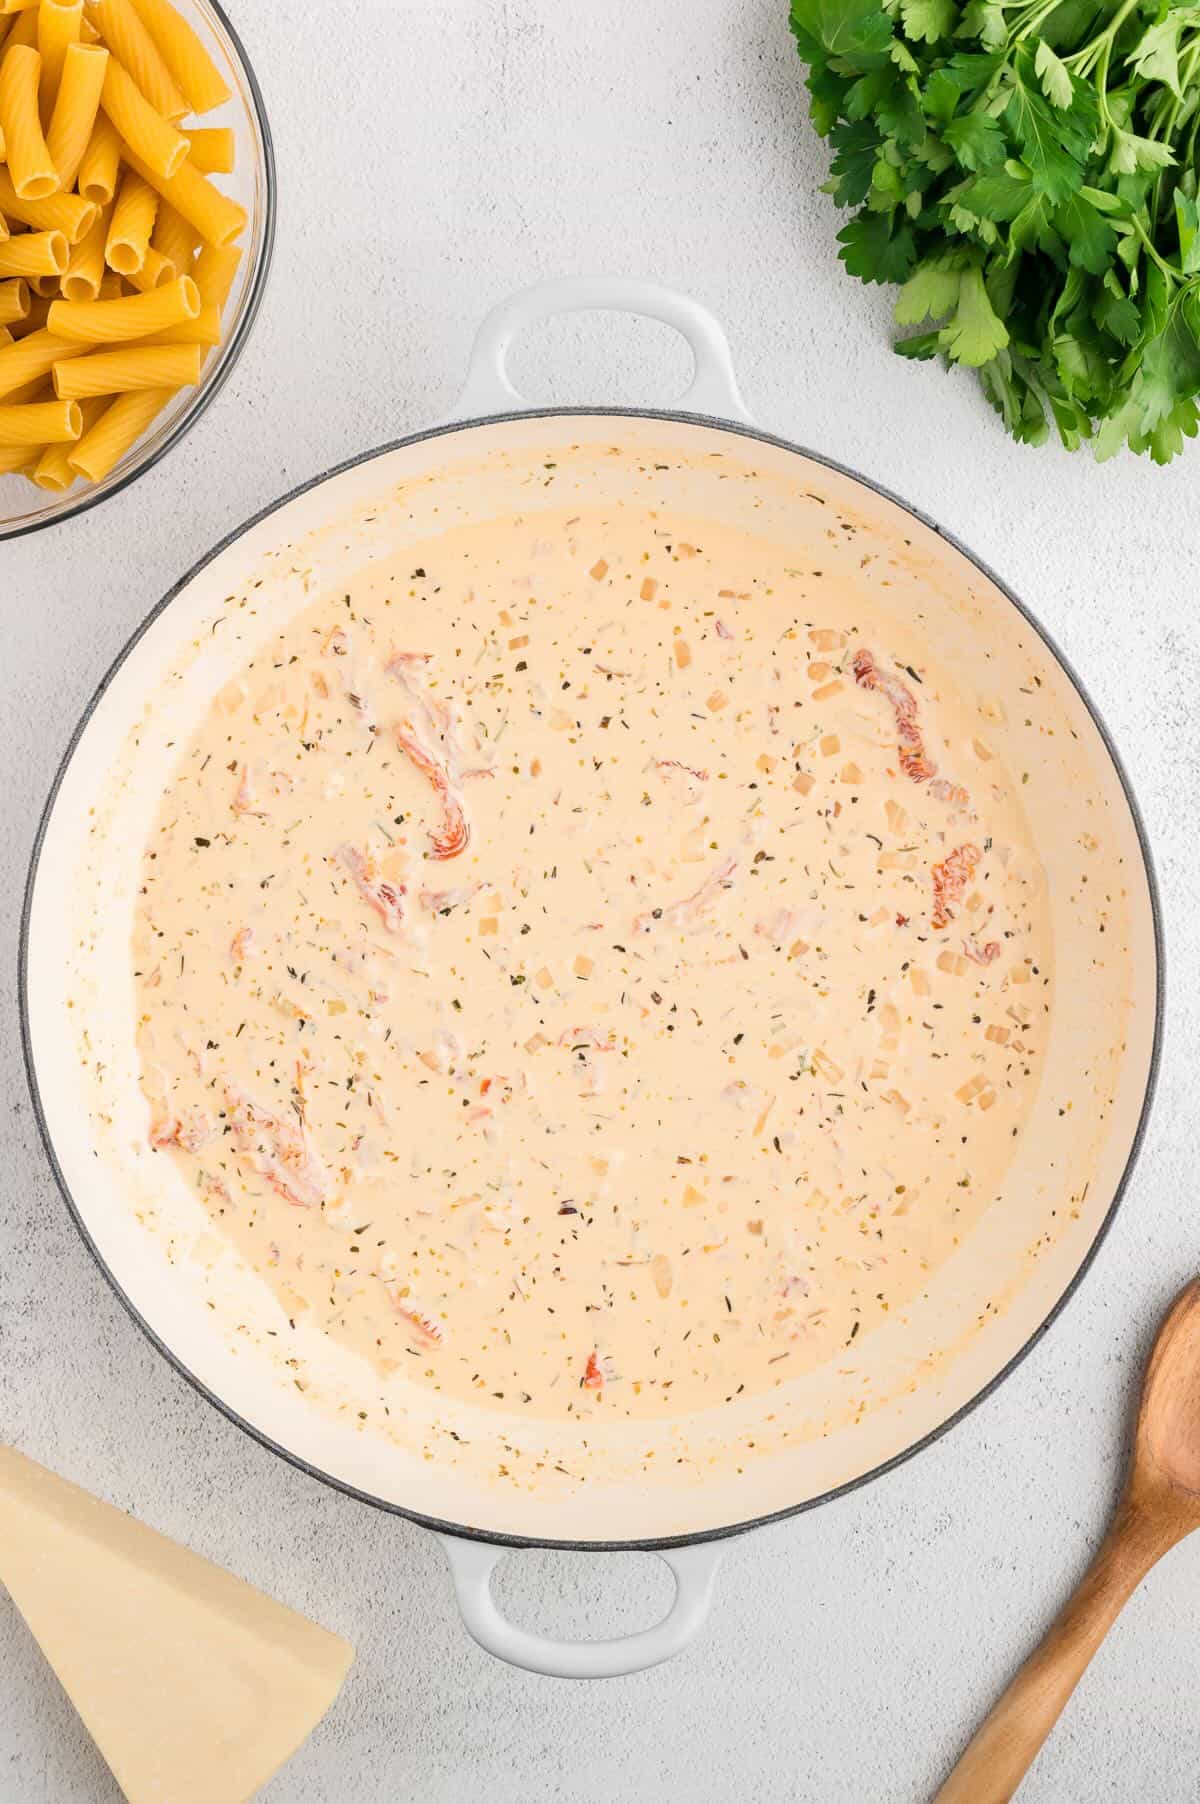 A creamy sauce made with heavy cream, Parmesan cheese and other ingredients in a skillet cooking. 